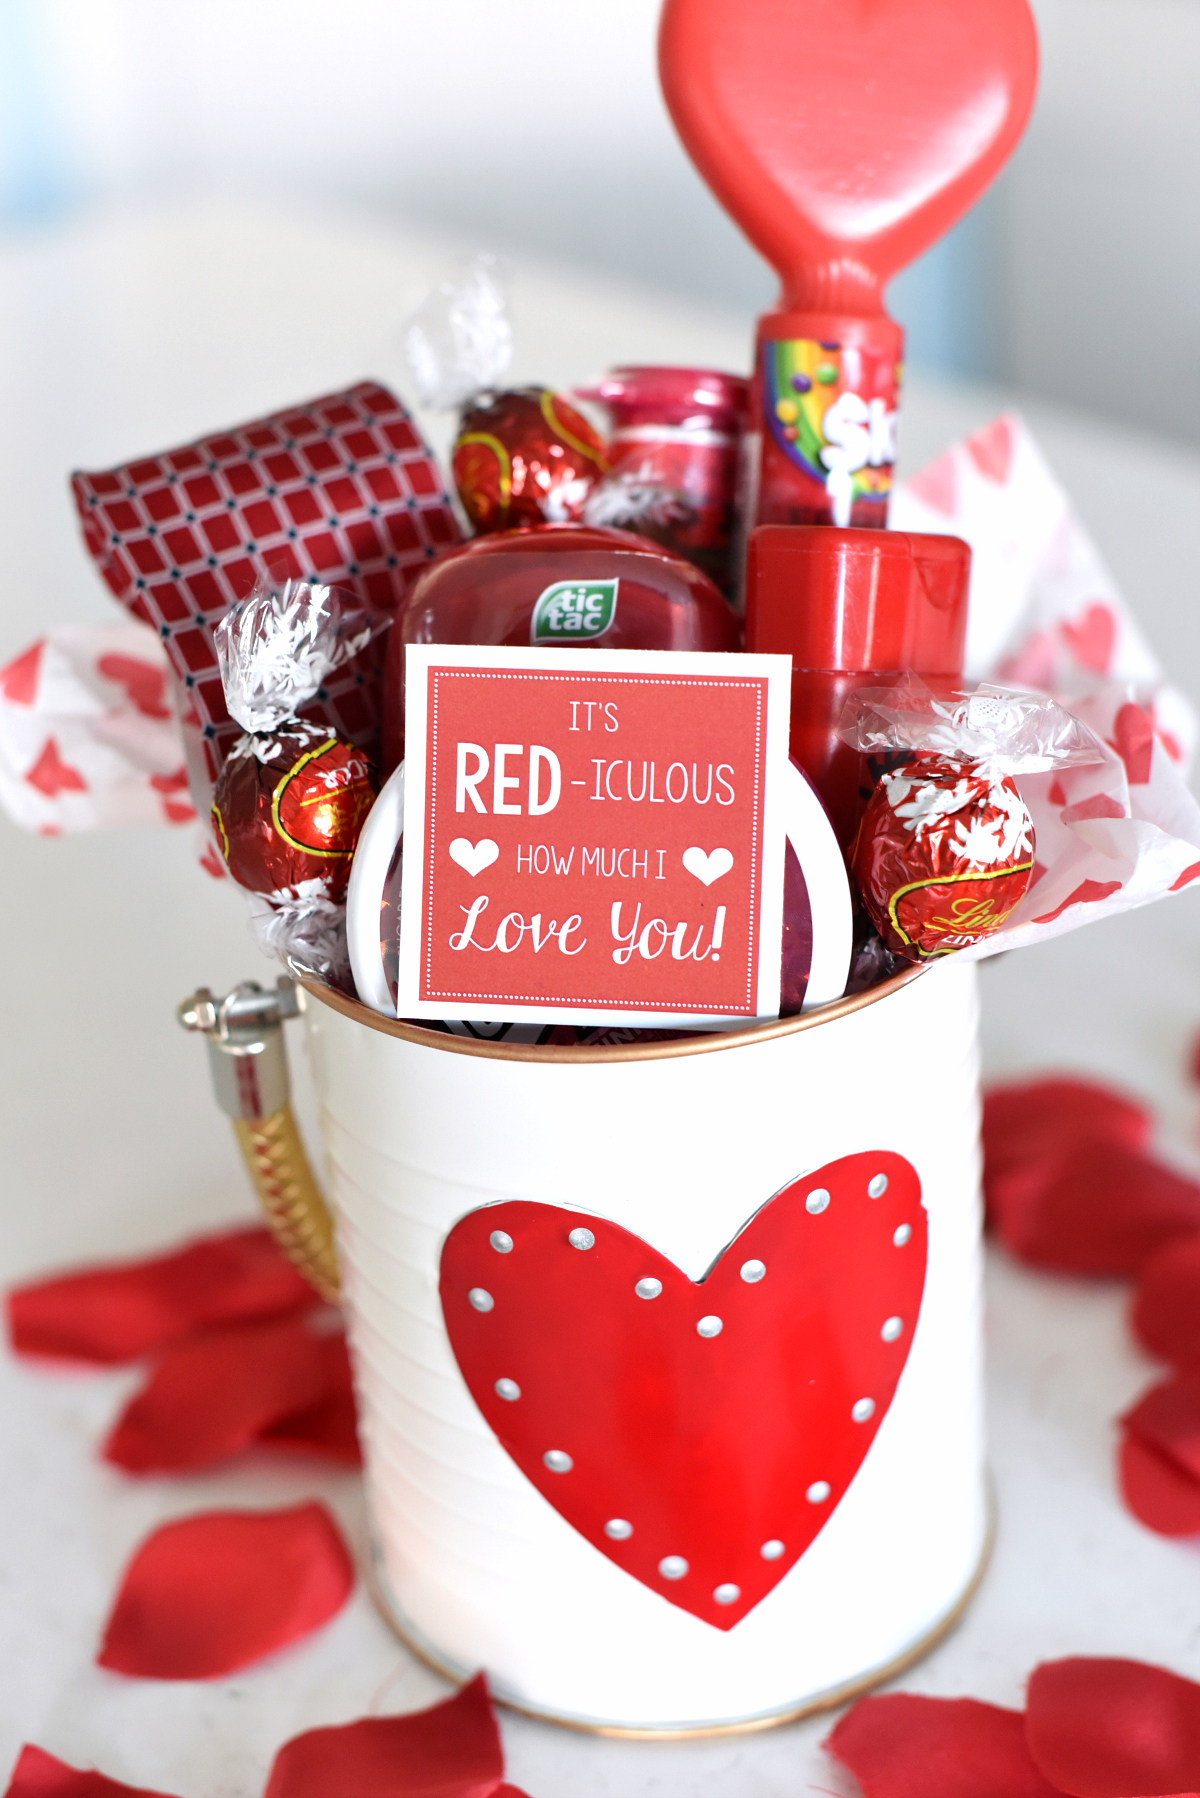 Fun Valentine's Gift Idea for Husband or Kids or Wife